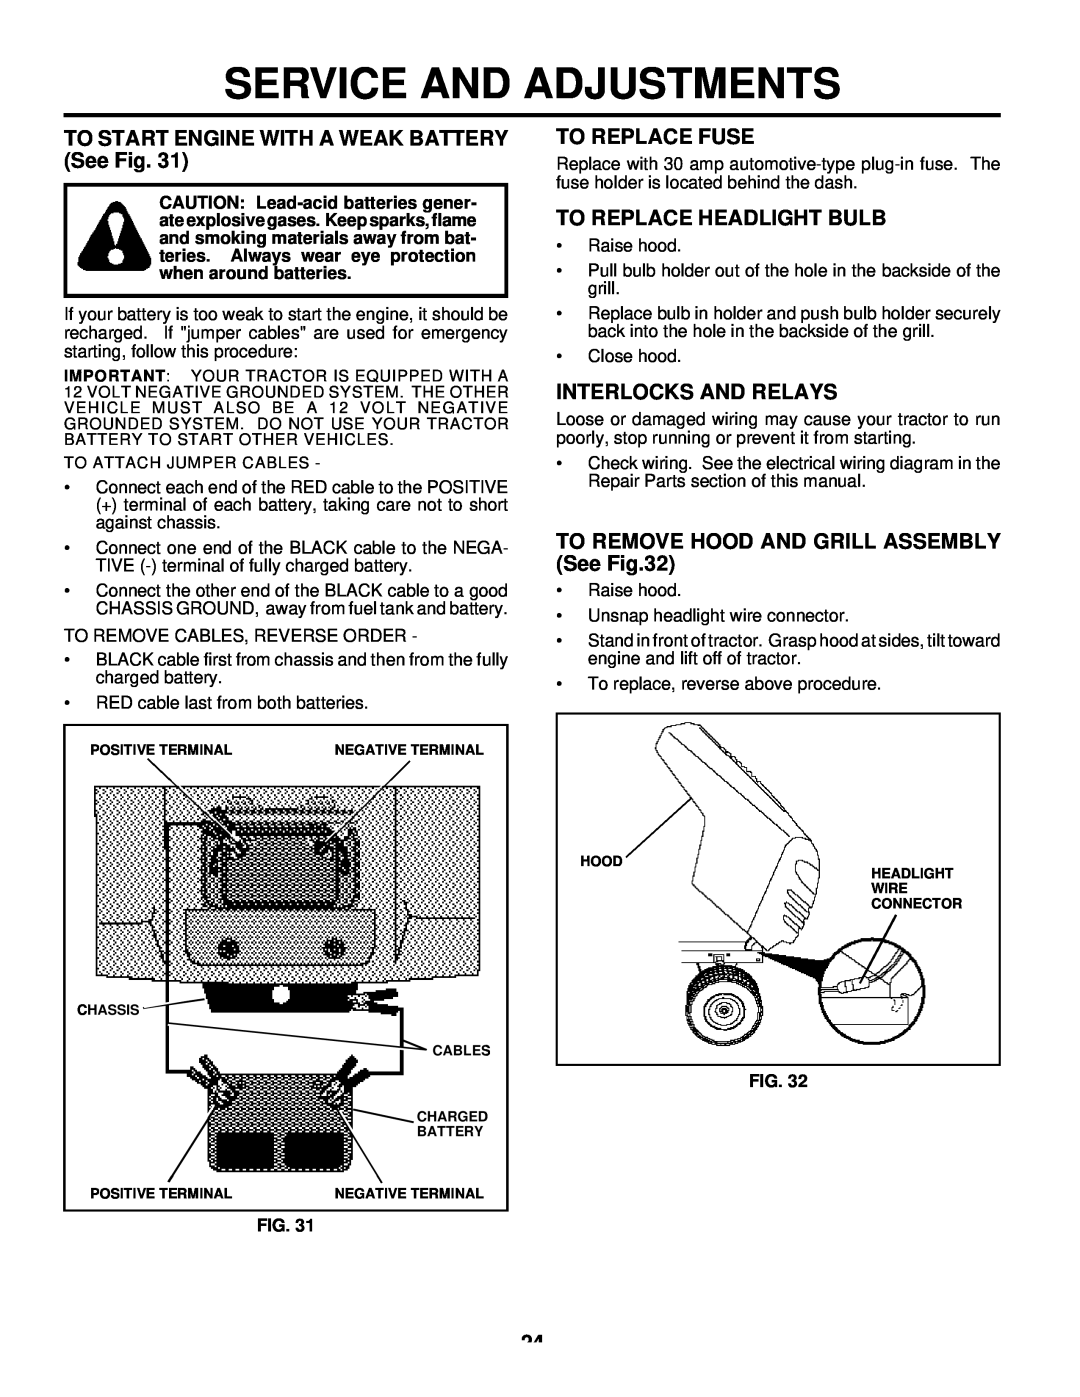 Husqvarna LTH125 owner manual TO START ENGINE WITH A WEAK BATTERY See Fig, To Replace Fuse, To Replace Headlight Bulb 